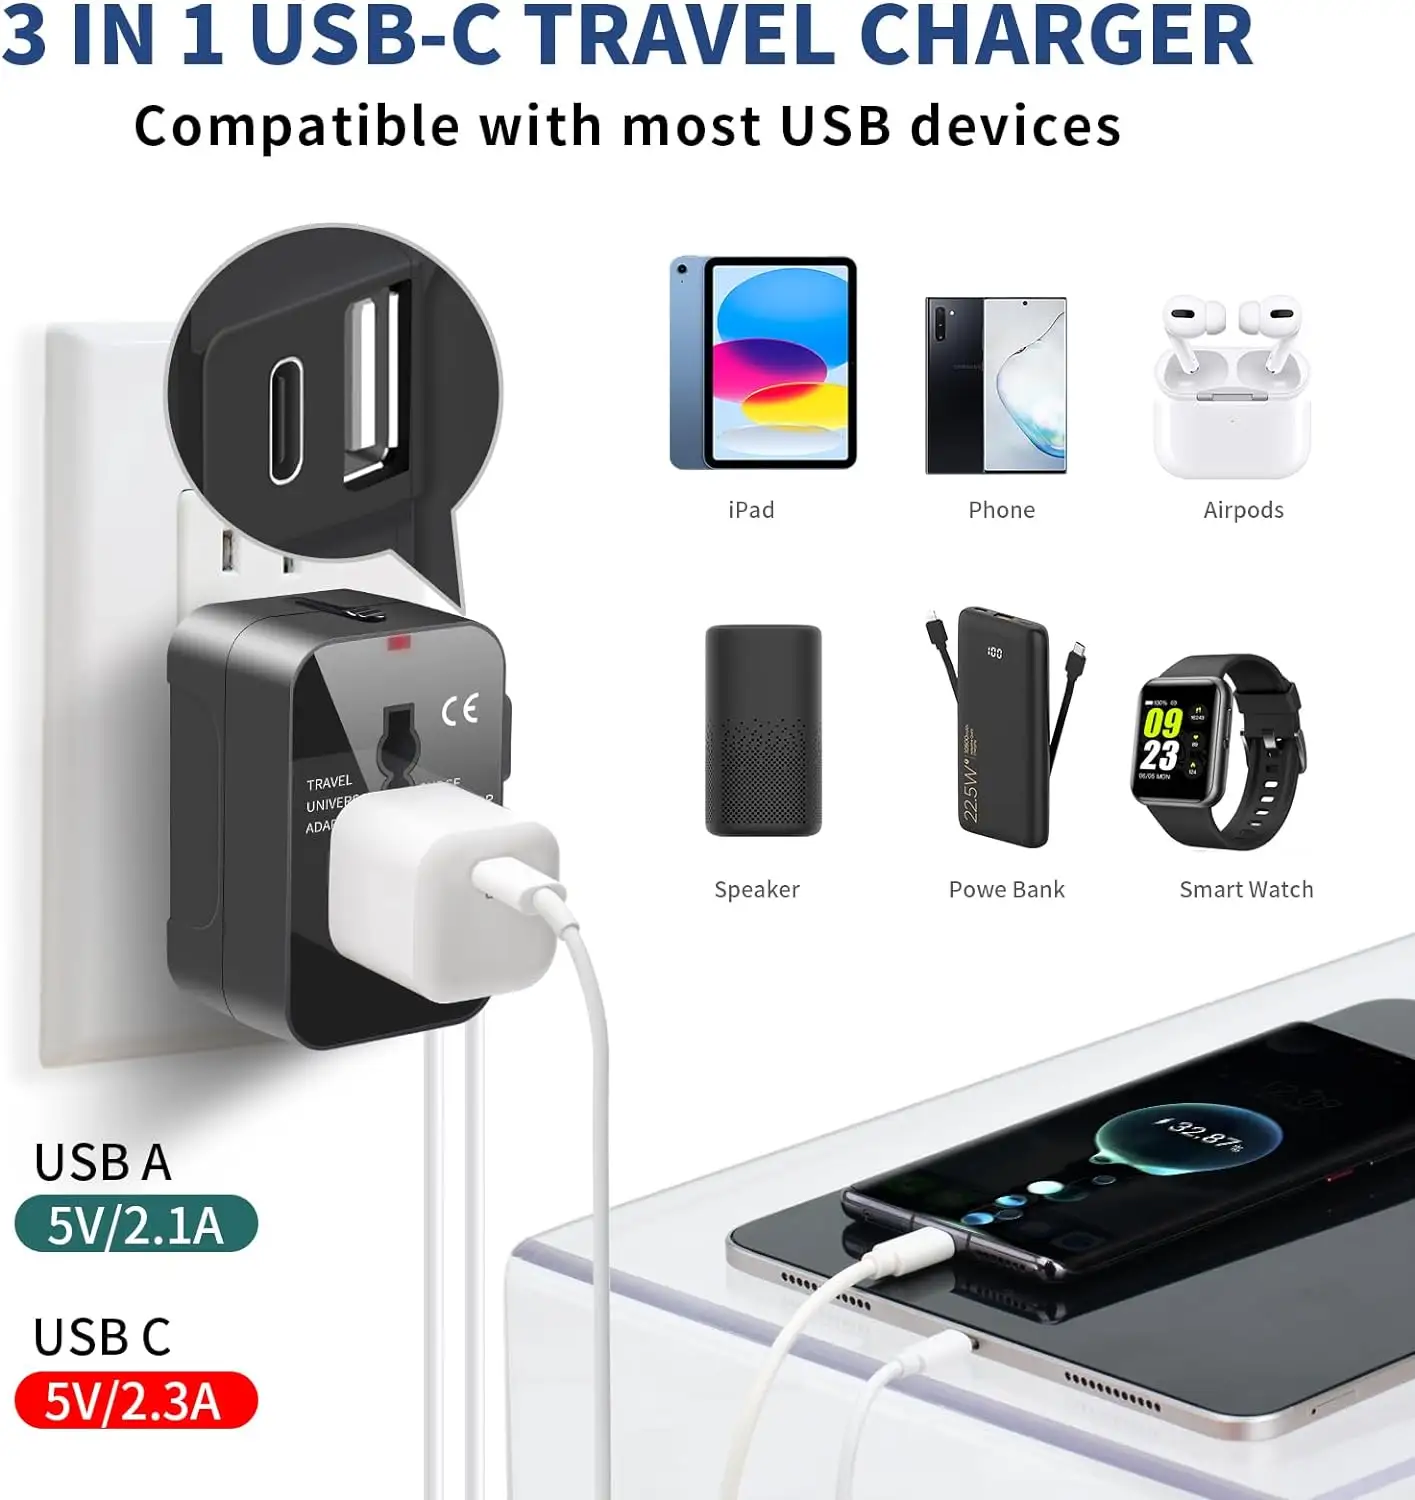 Universal Travel Adapter With USB C - All-in-One Worldwide Wall Charger With AC Power Plug Adapter For USA EU UK AUS